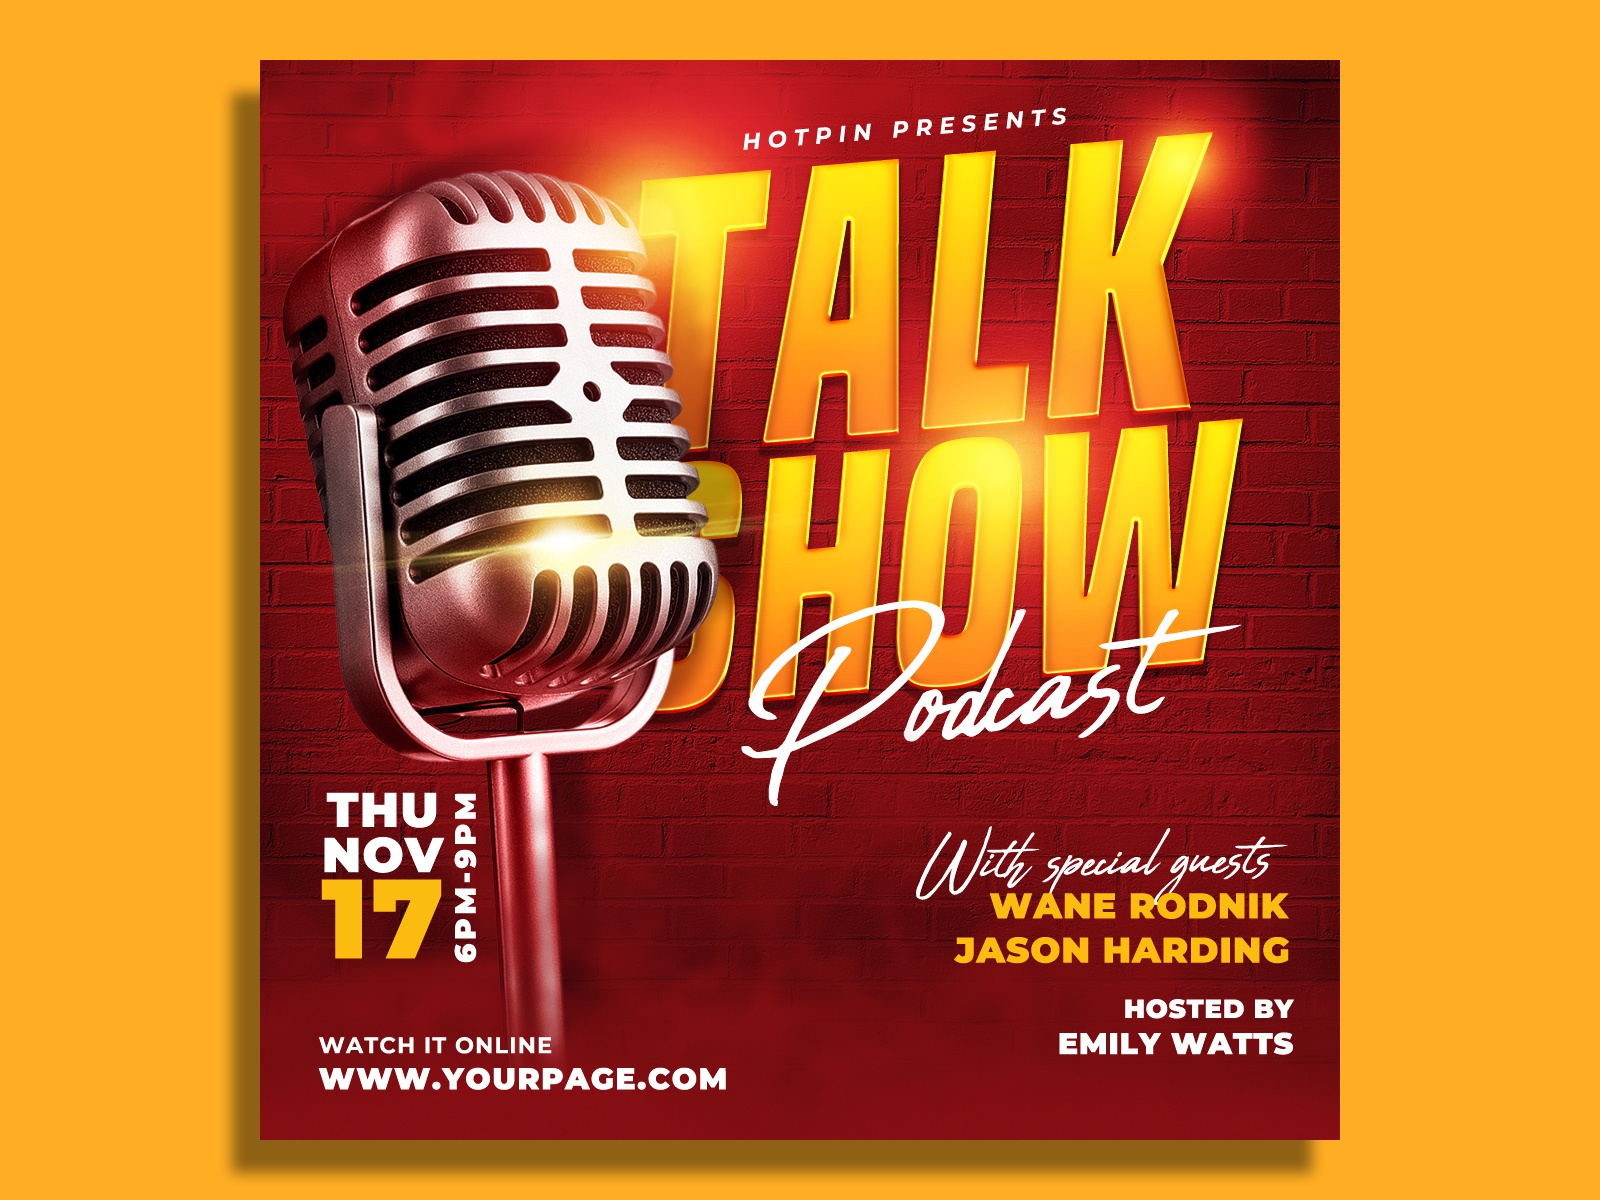 Podcast Talk Show Flyer Template by Hotpin on Dribbble For Radio Show Flyer Template In Radio Show Flyer Template